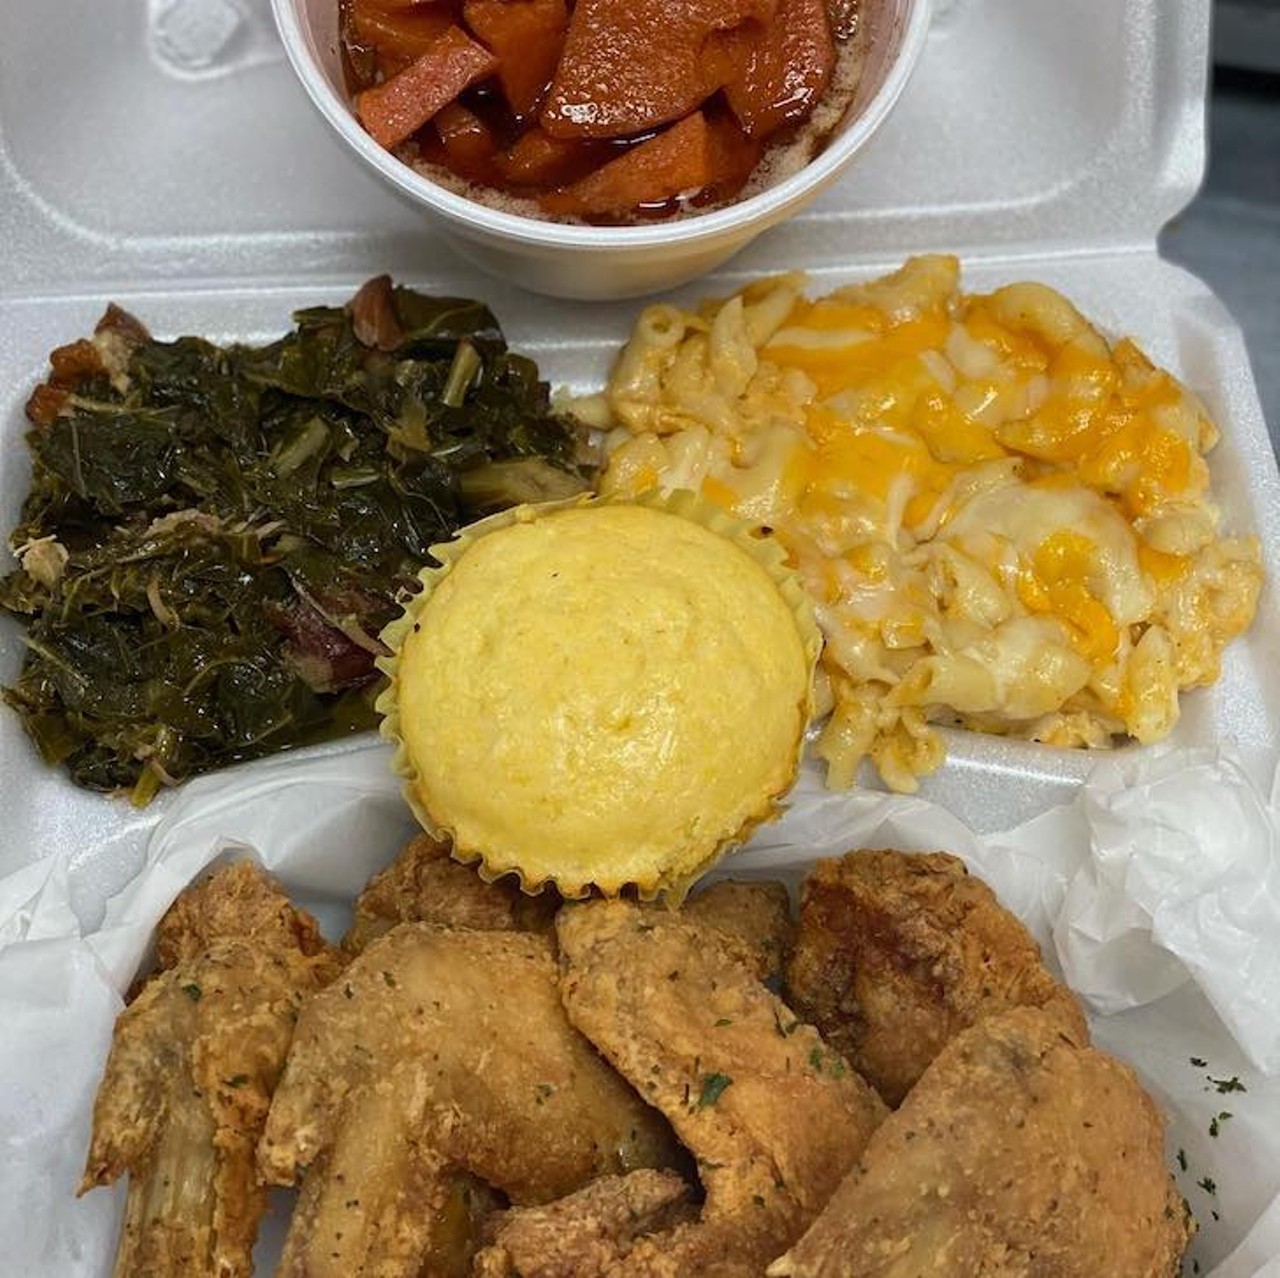 14. Lillie Bell&#146;s
25030 Southfield Rd., Southfield; 248-595-9070
&#147;We had two rib tip dinners with greens and baked beans, a large order of mac and cheese, a gimme all you got spud, and strawberry banana pudding.
I was taken back to my childhood. It was so unbelievably good. All of it.
Thank you so so so much for the amazing meal.&#148; - Katie H.
Photo via  Lillie Bell&#146;s/Facebook